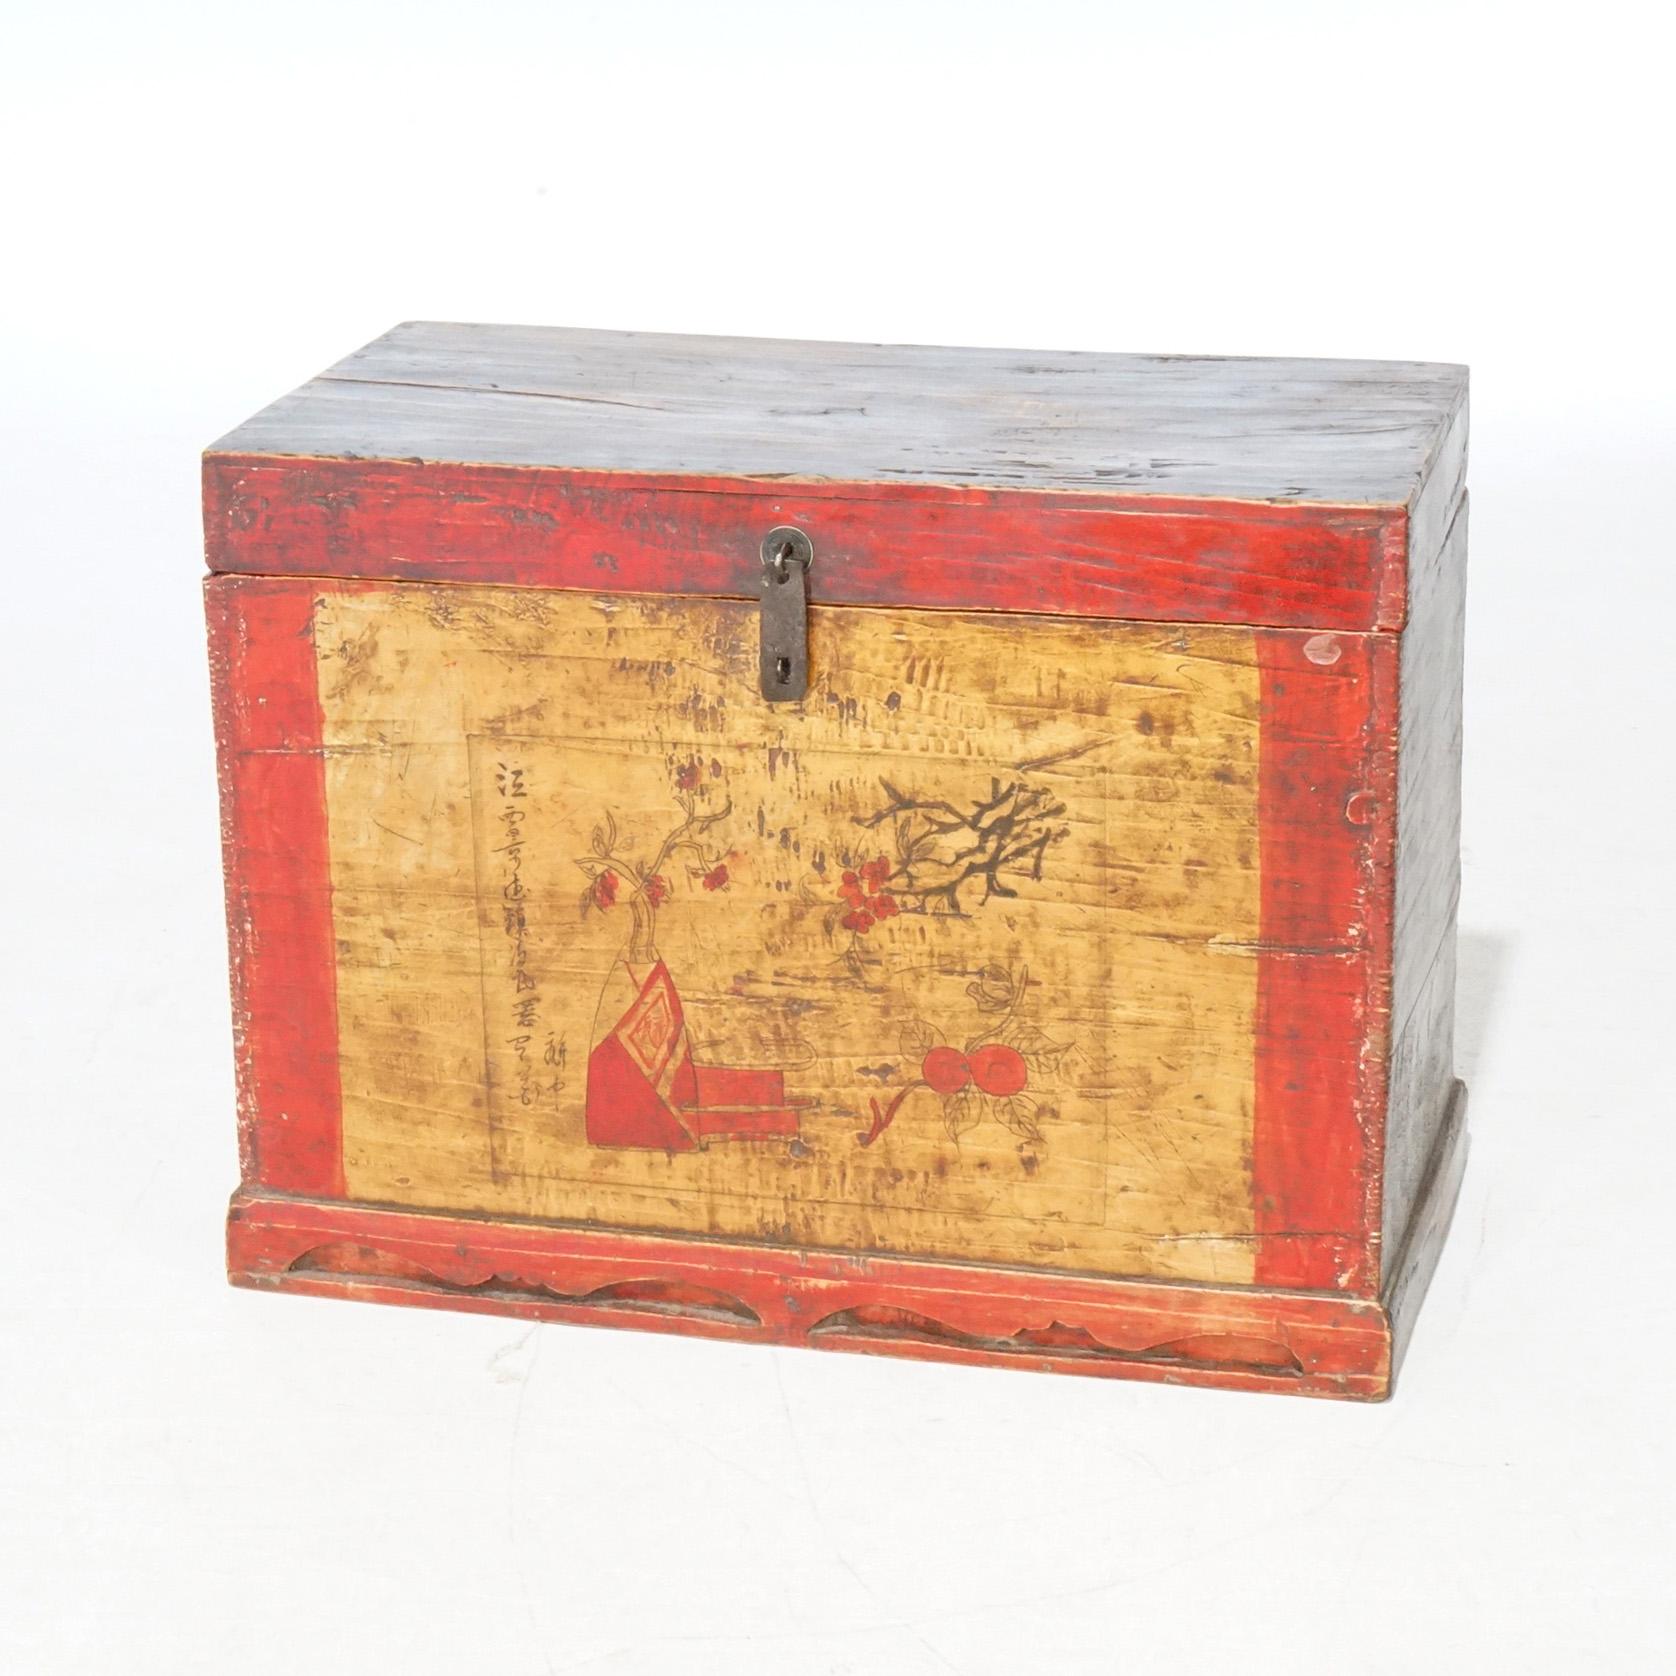 An antique Chinese storage box offers softwood construction with hinged lid and hand painted poychromed front having leaf and fruit decoration, 20th century

Measures - 19.25